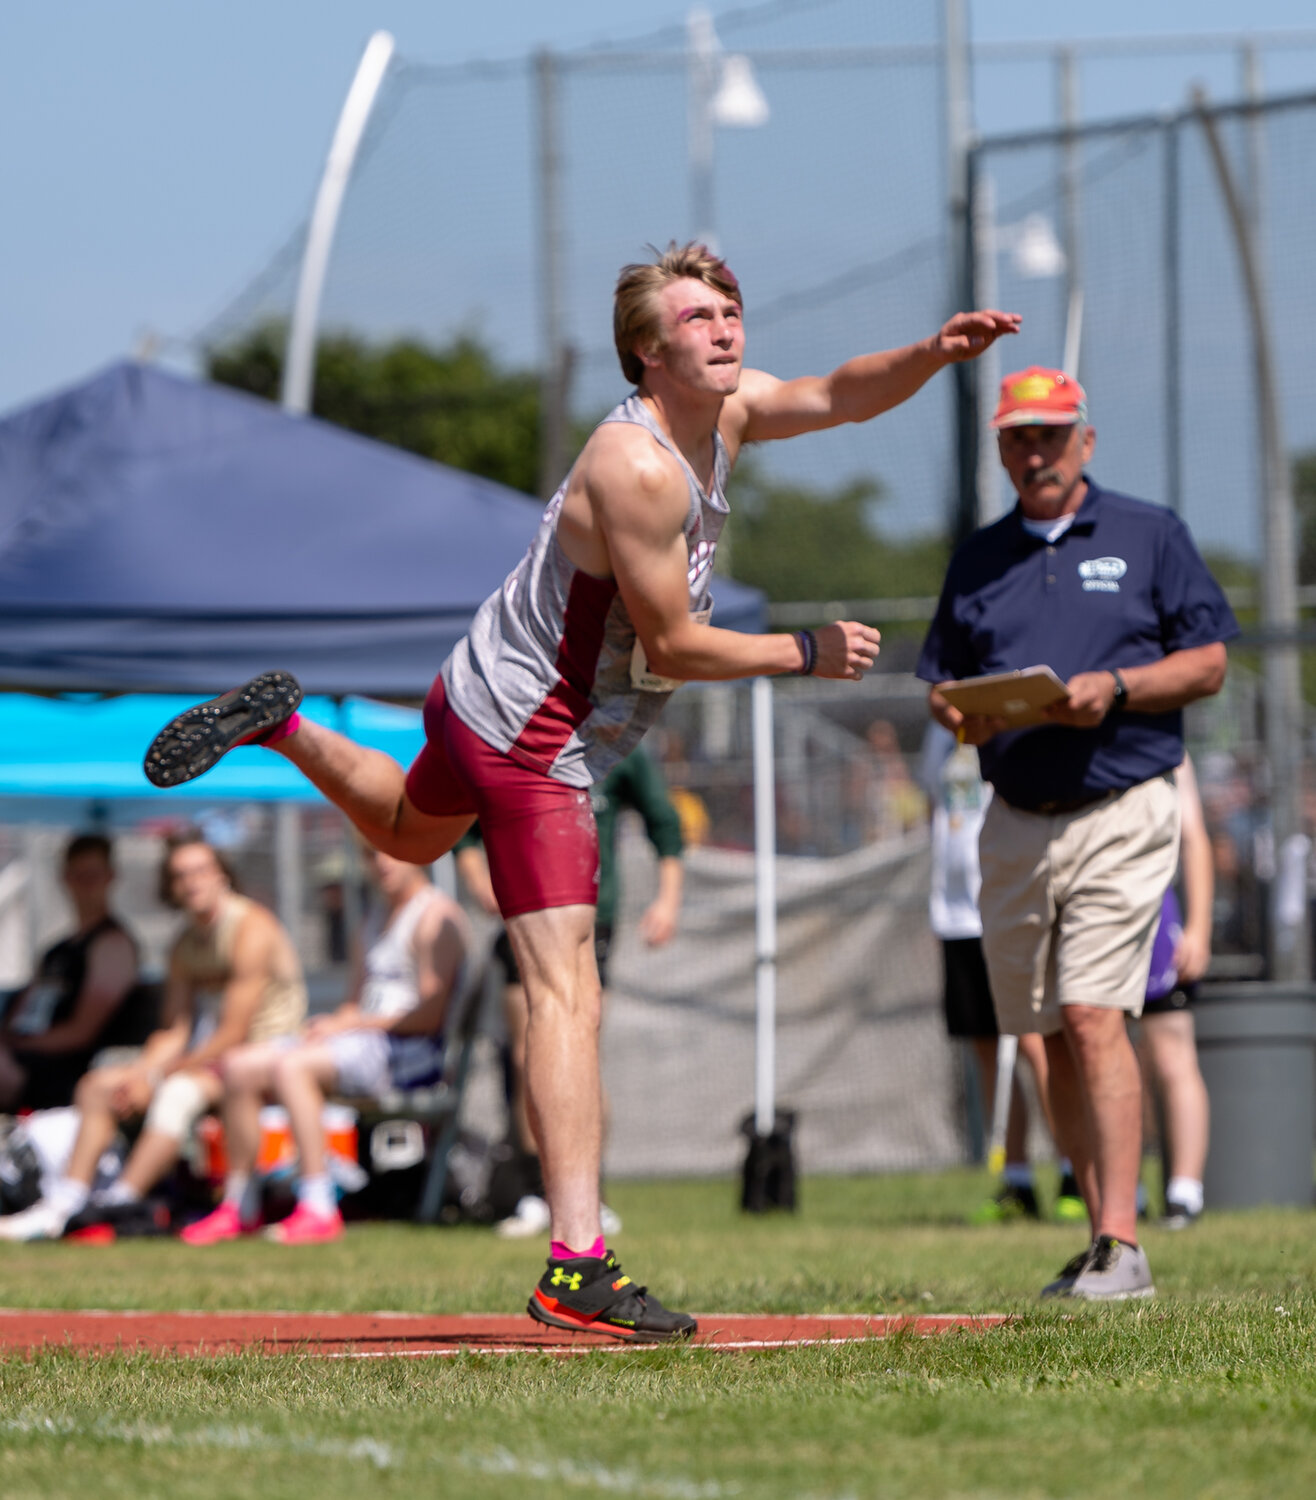 W.F. West’s Lucas Hoff toes the line to avoid a foul in the 2A boys javelin at the WIAA 2A/3A/4A State Track and Field Championships on Saturday, May 27, 2023, at Mount Tahoma High School in Tacoma. (Joshua Hart/For The Chronicle)